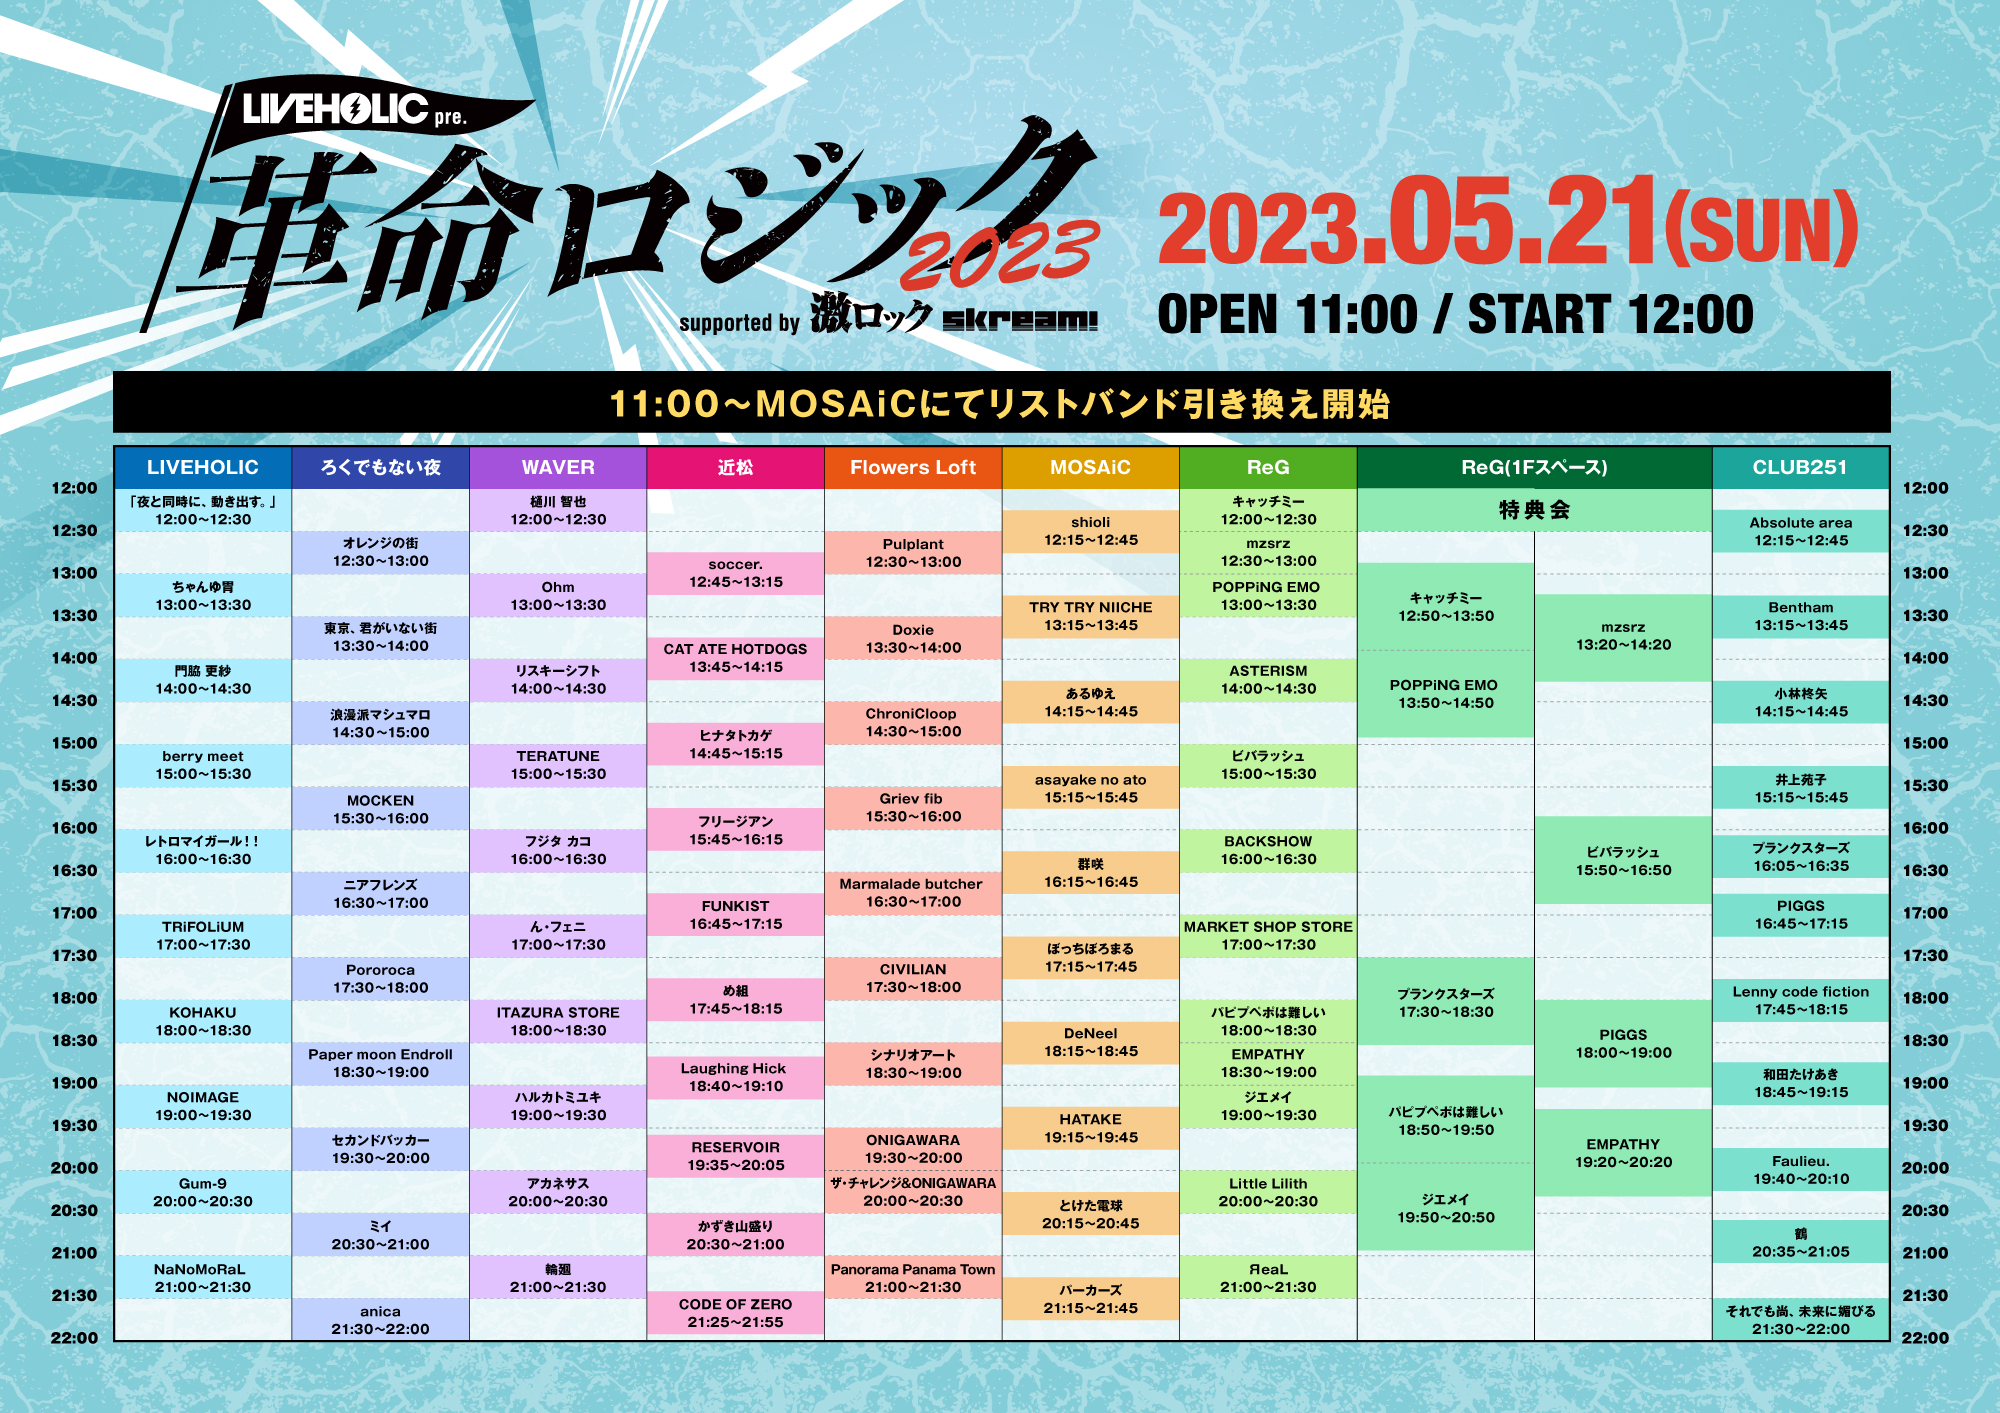 LIVEHOLIC presents. “革命ロジック2023“ supported by 激ロック & Skream!